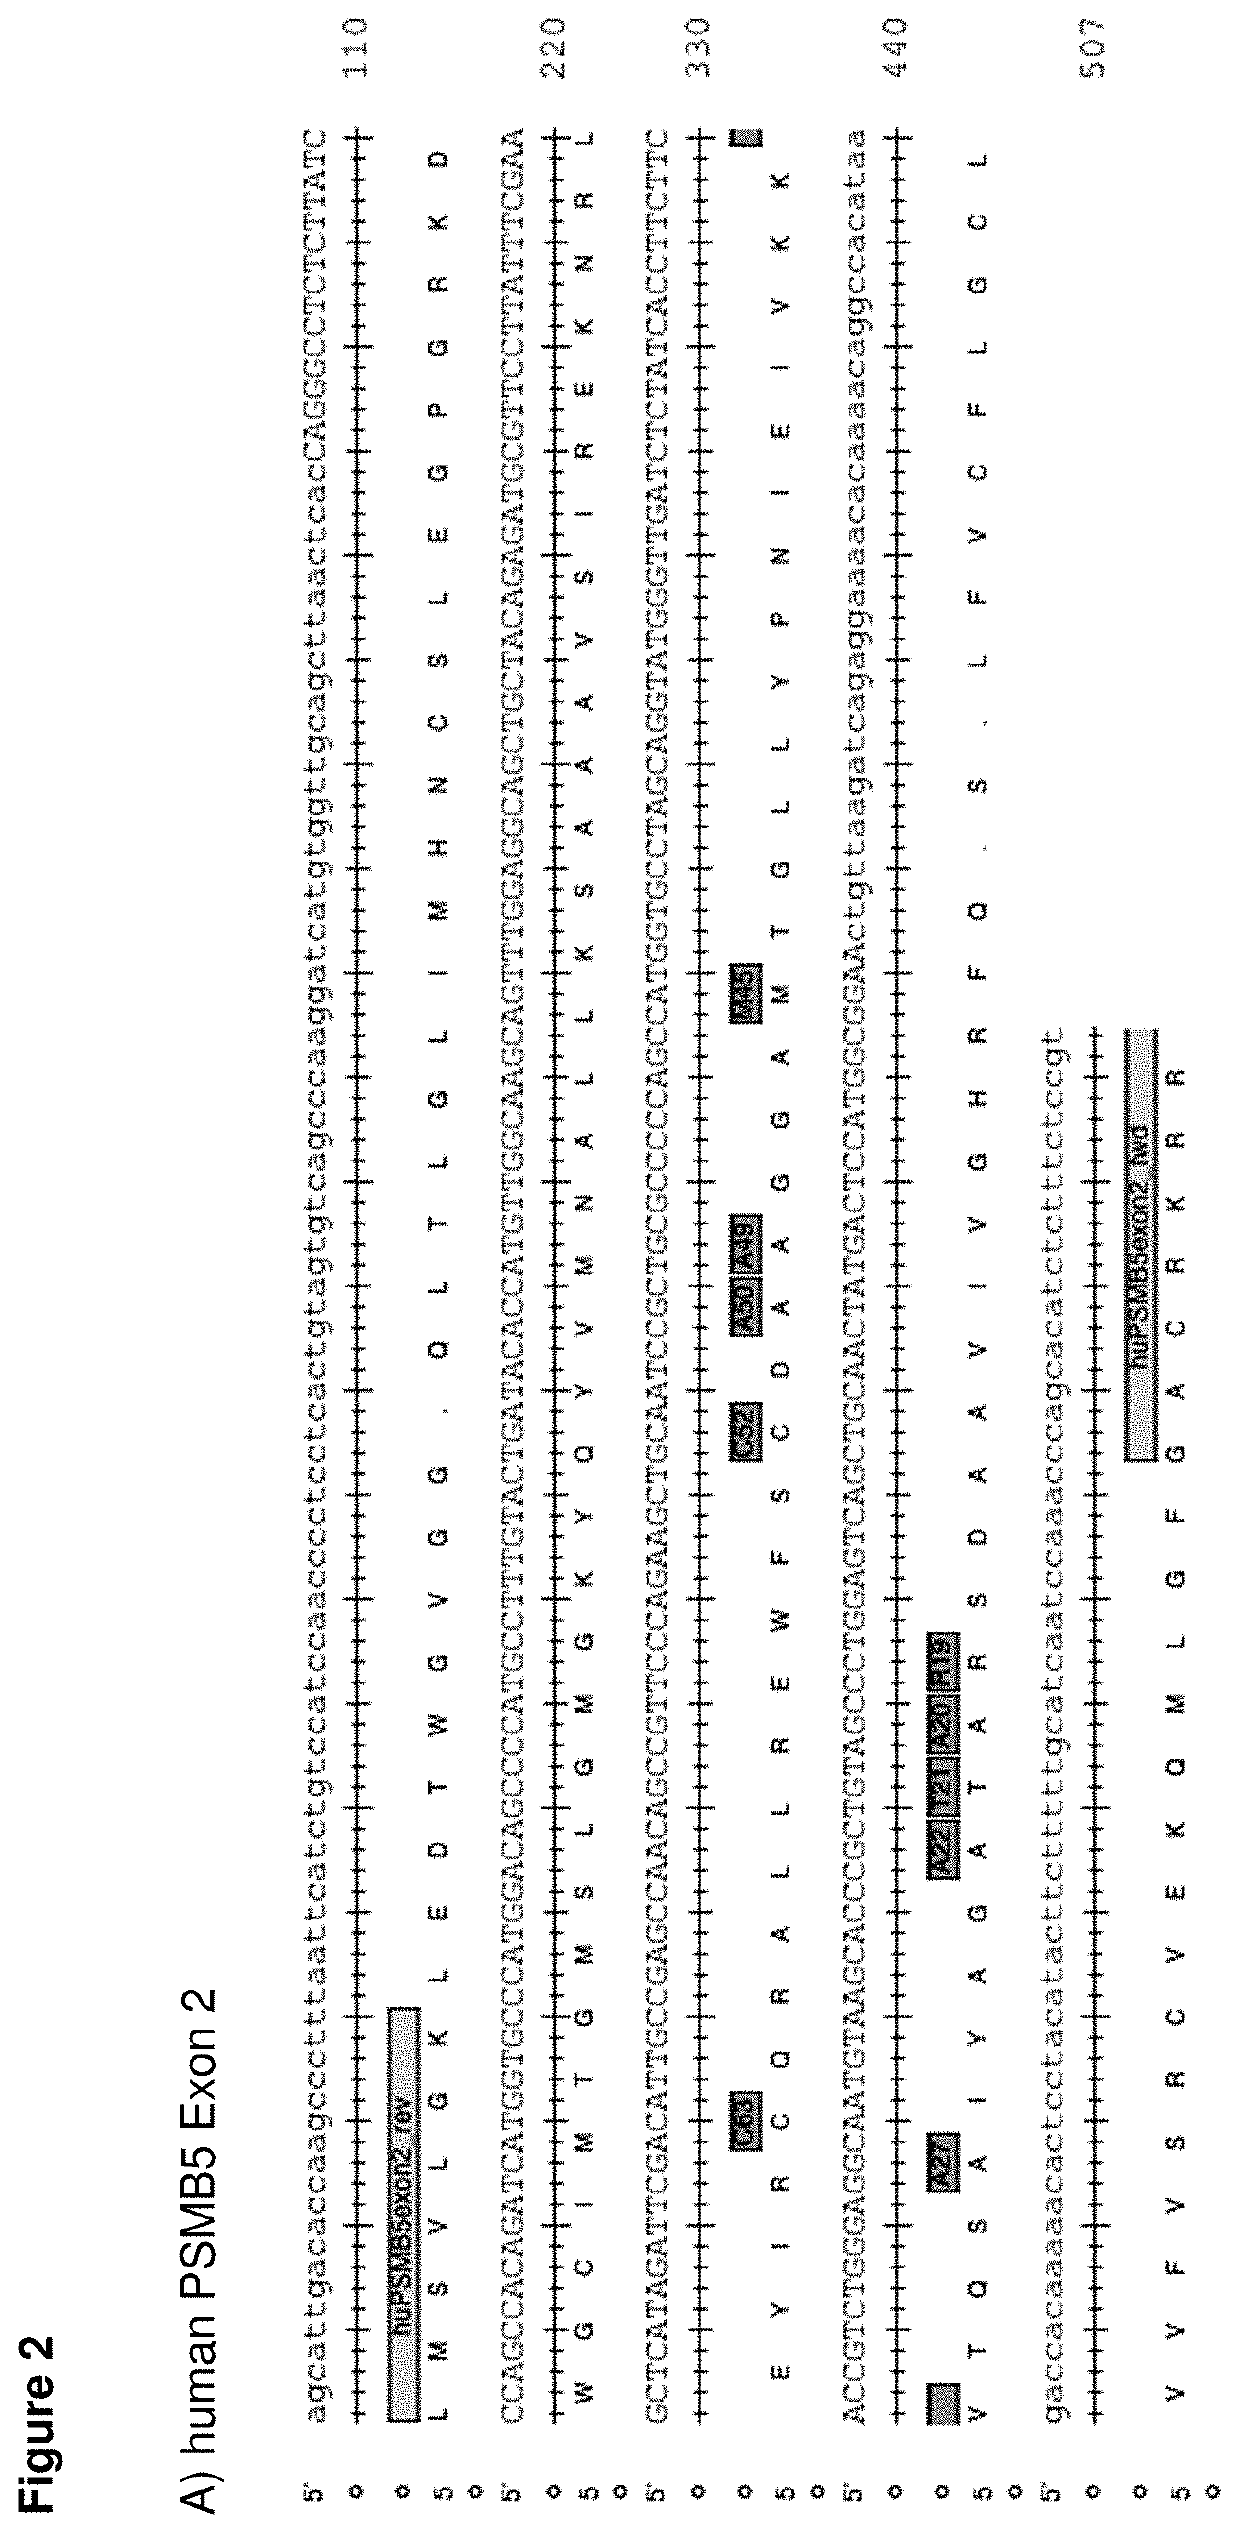 Method of identifying patients with bortezomib resistant multiple myeloma and other blood diseases